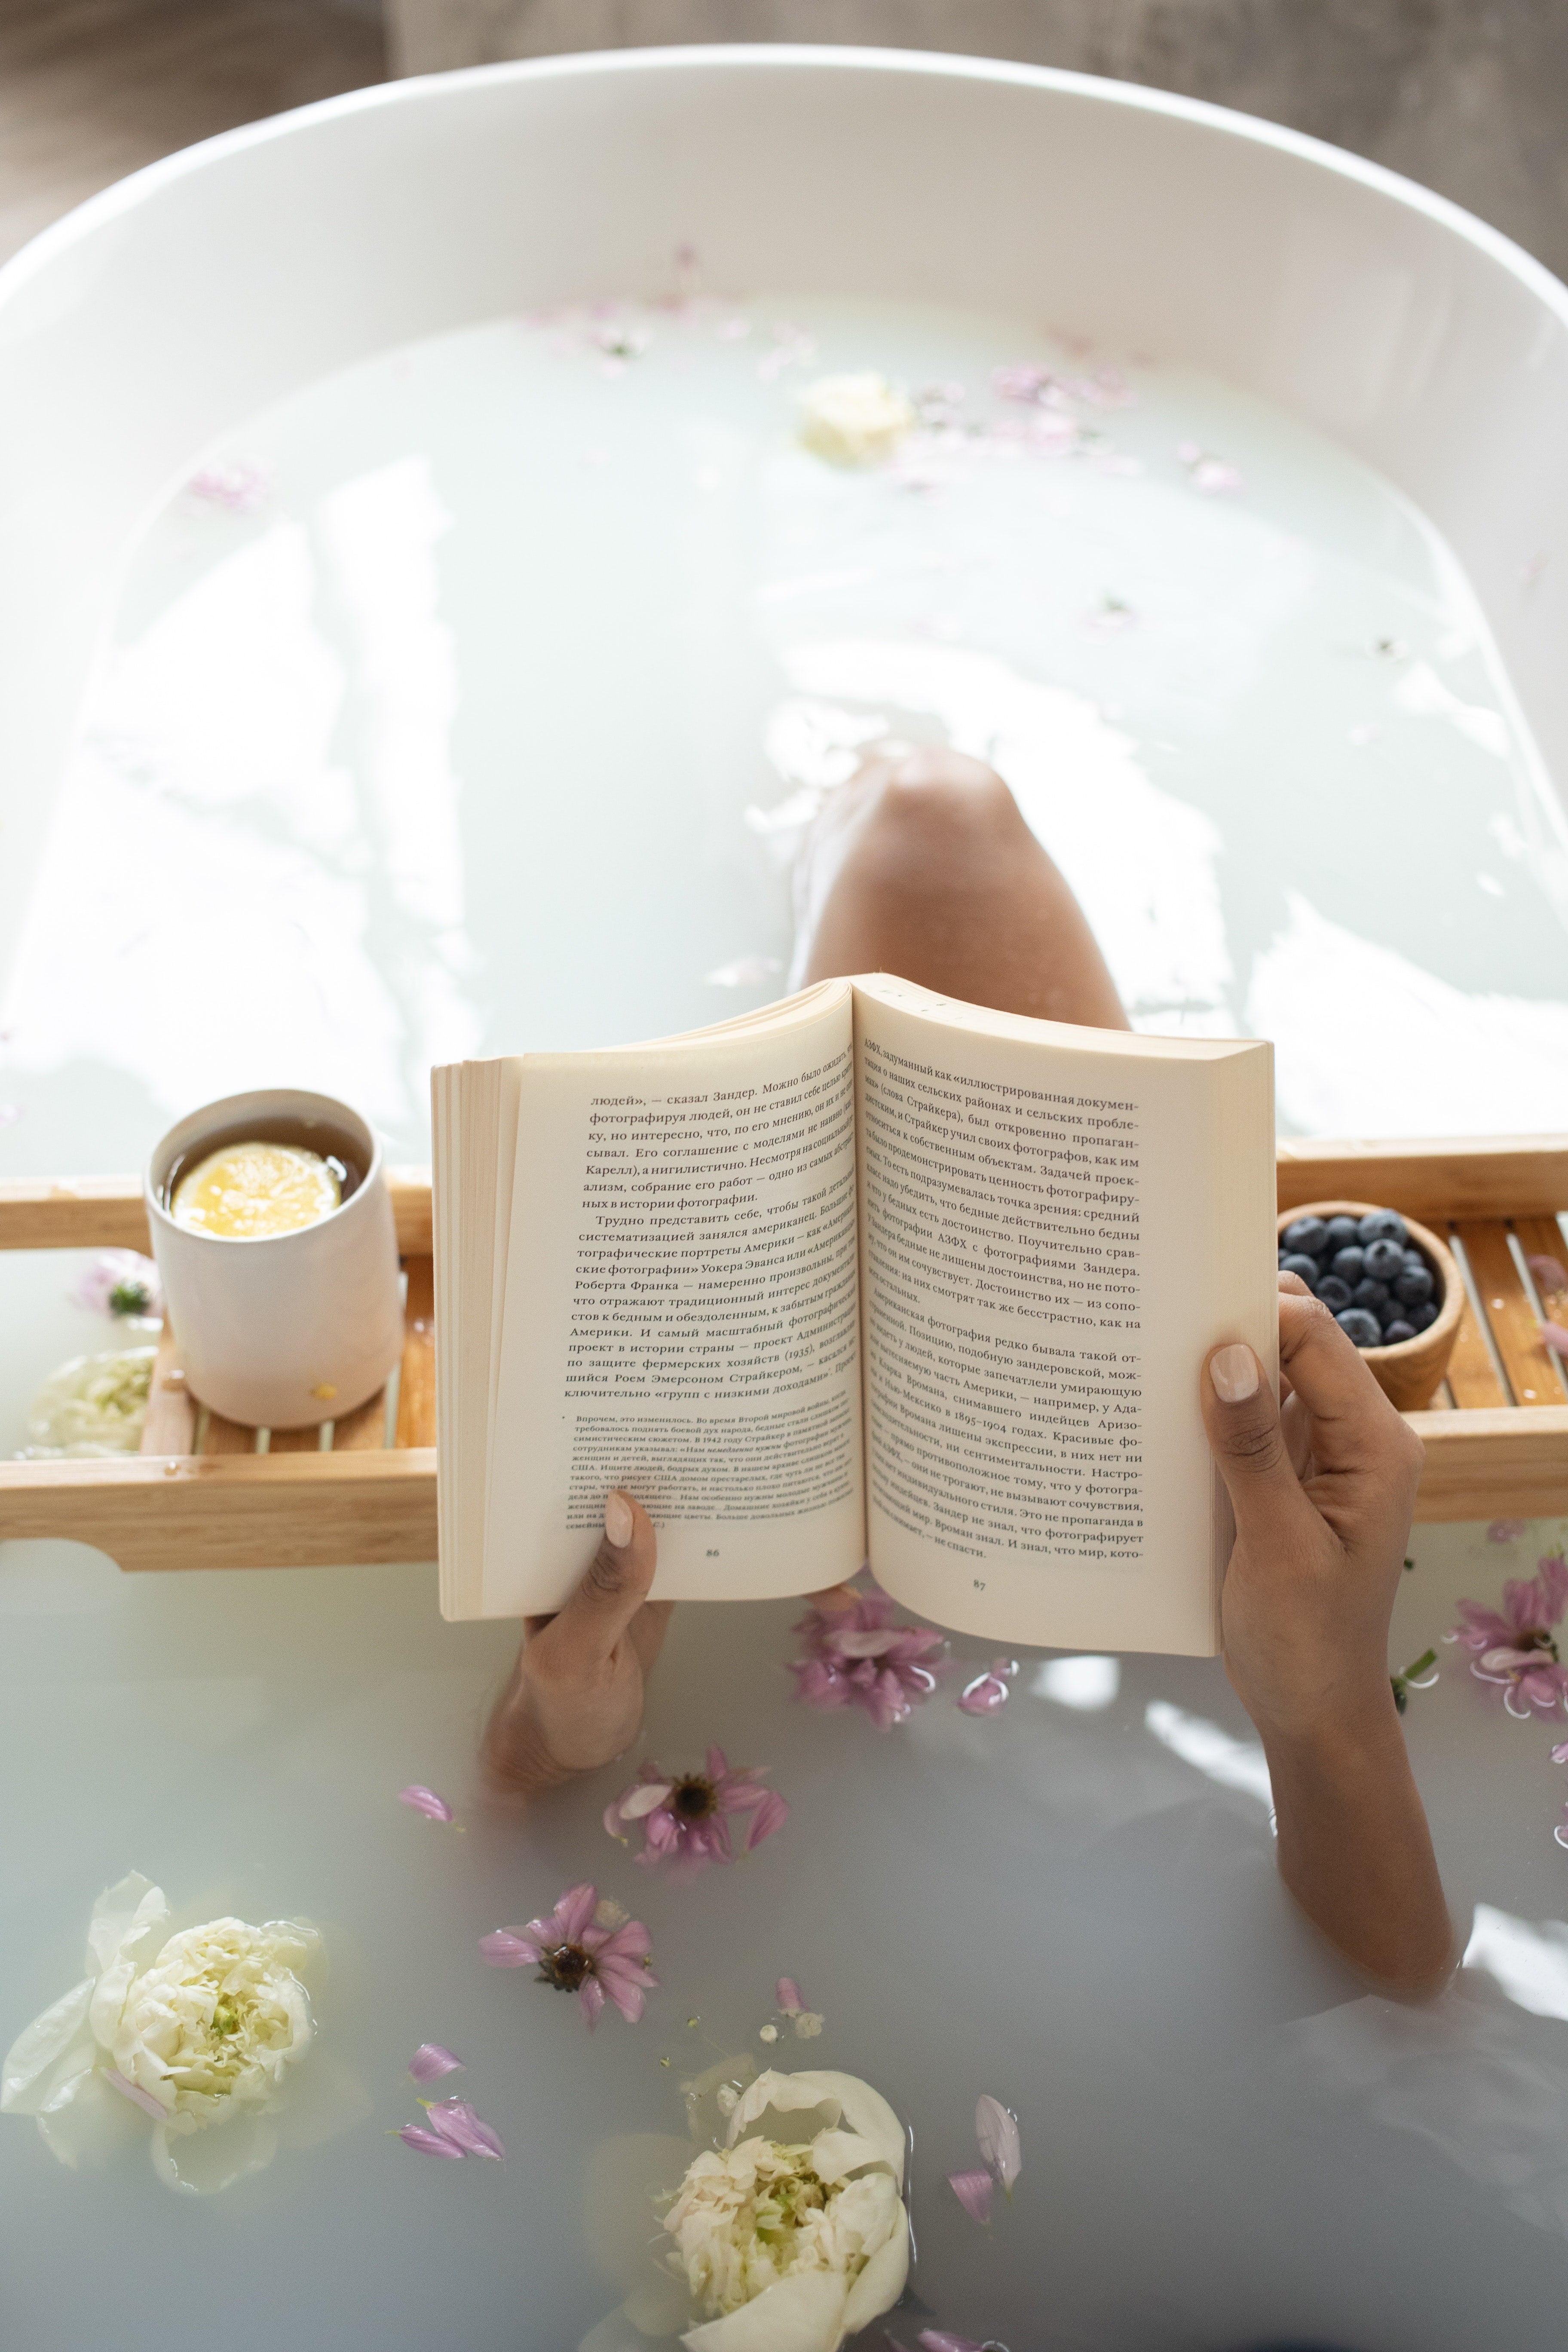 Self-Care Ideas That Anyone Can Do